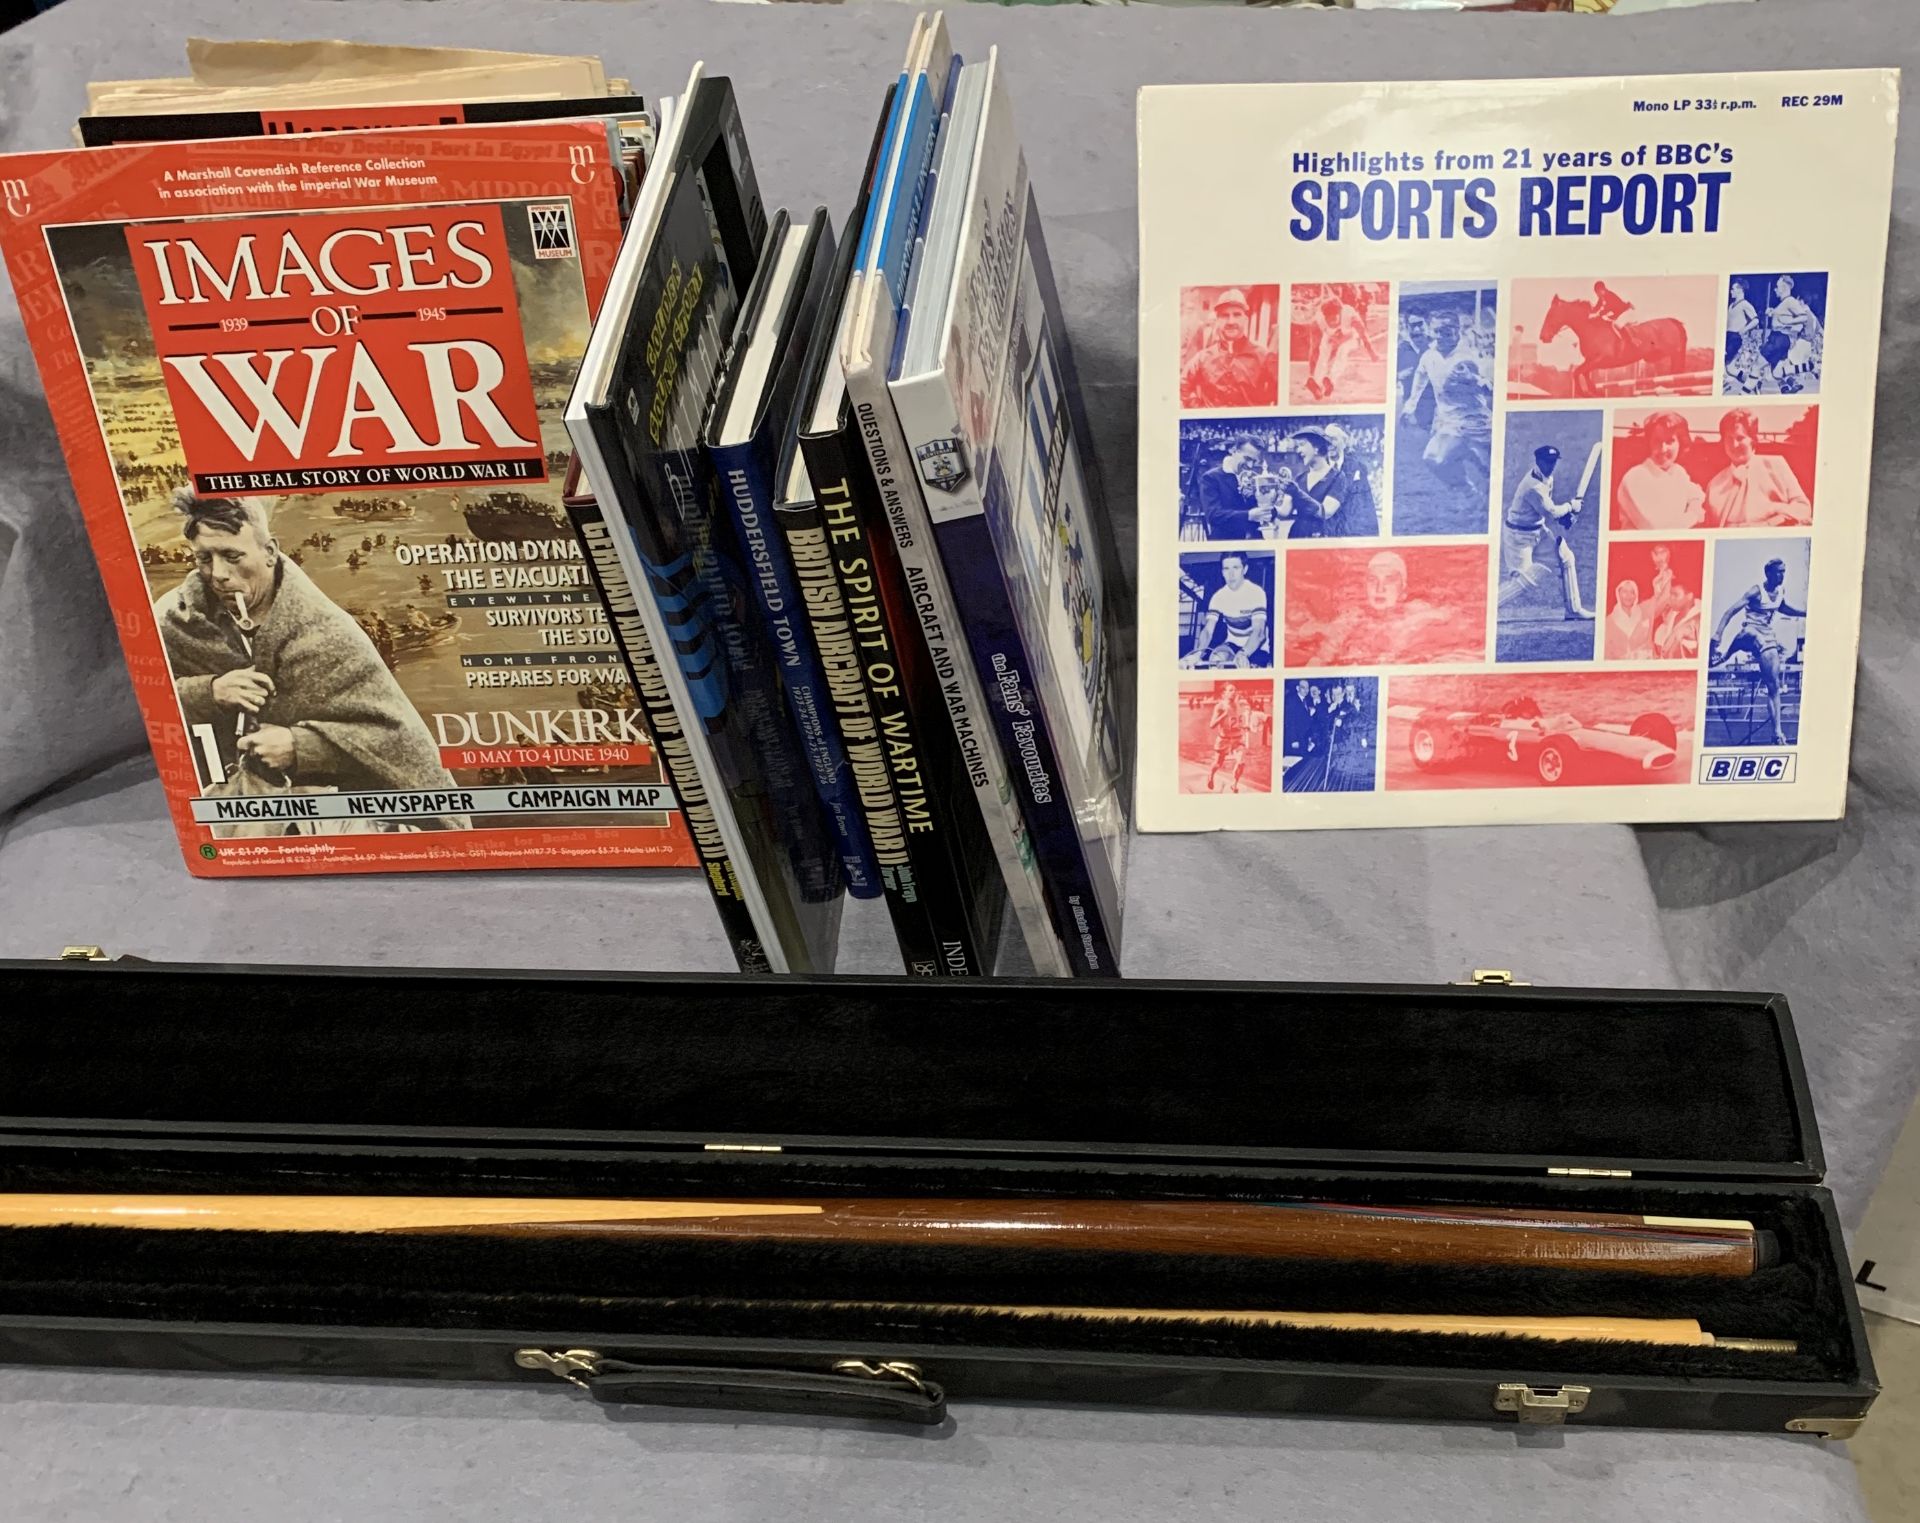 A Riley pool cue in case, War and Huddersfield Town related books and magazines etc. - Image 2 of 2